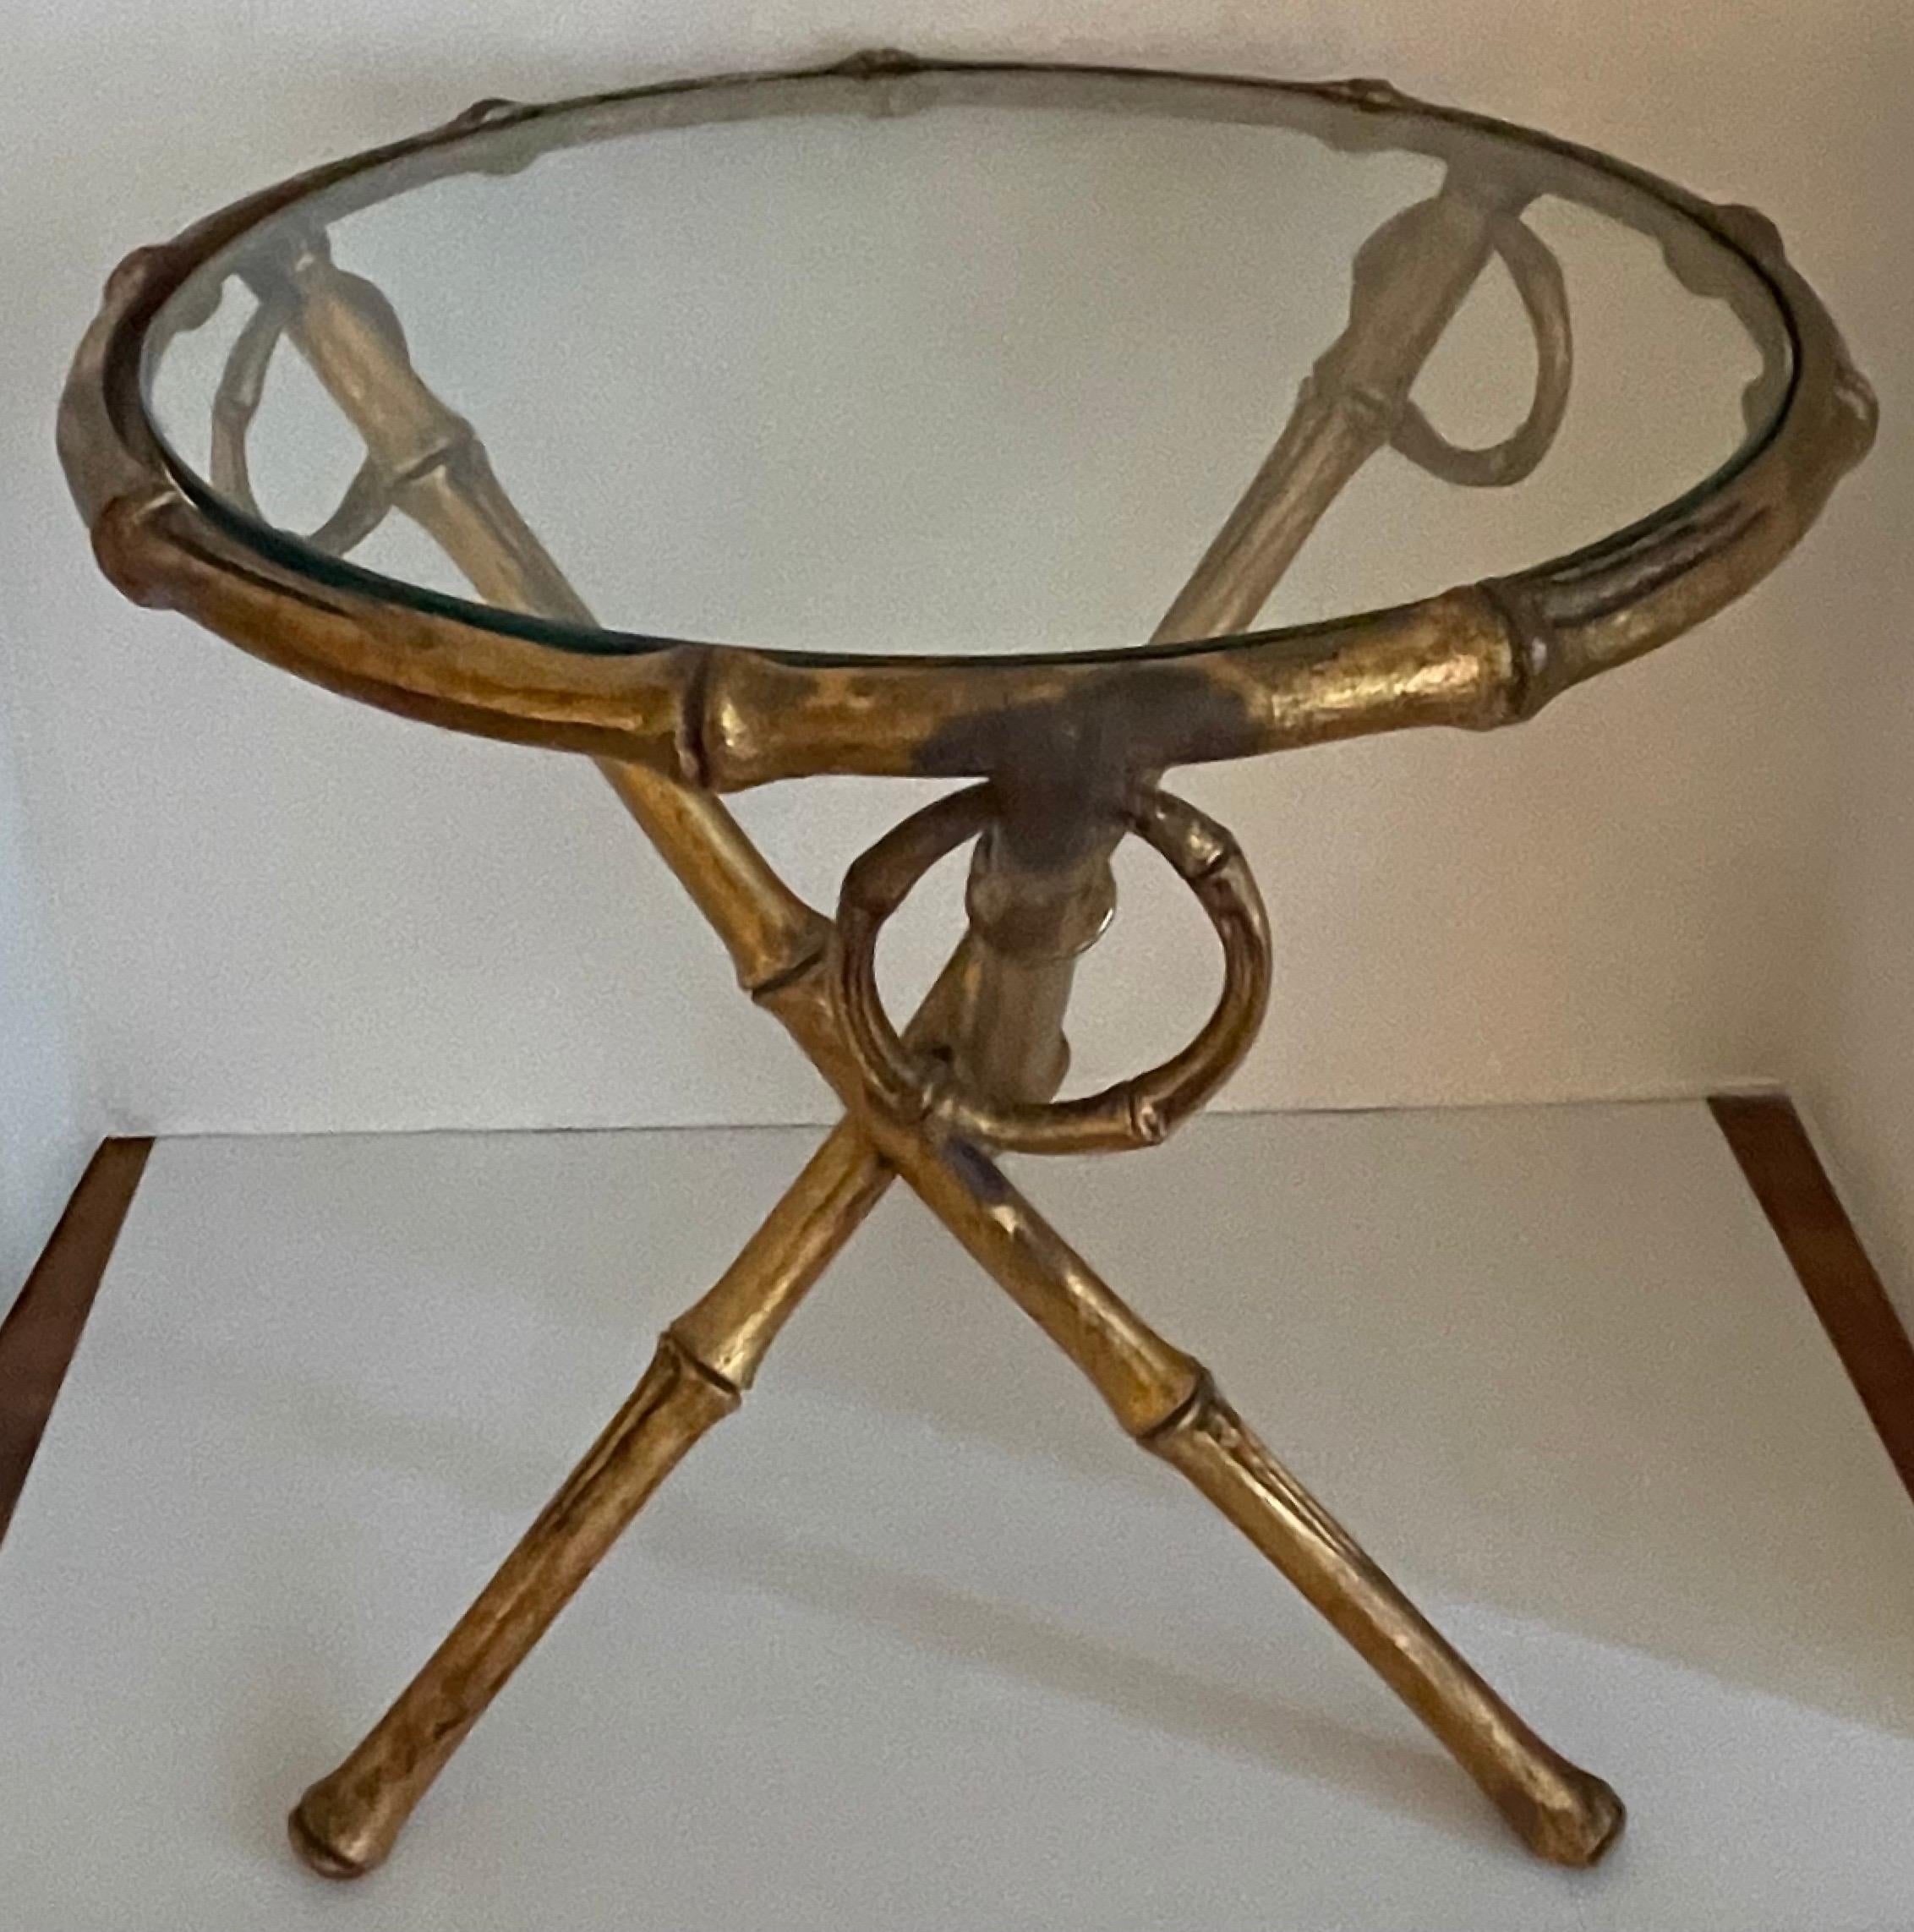 1960s gilt metal faux bamboo tripod style round accent or side table. Inset clear beveled glass top.